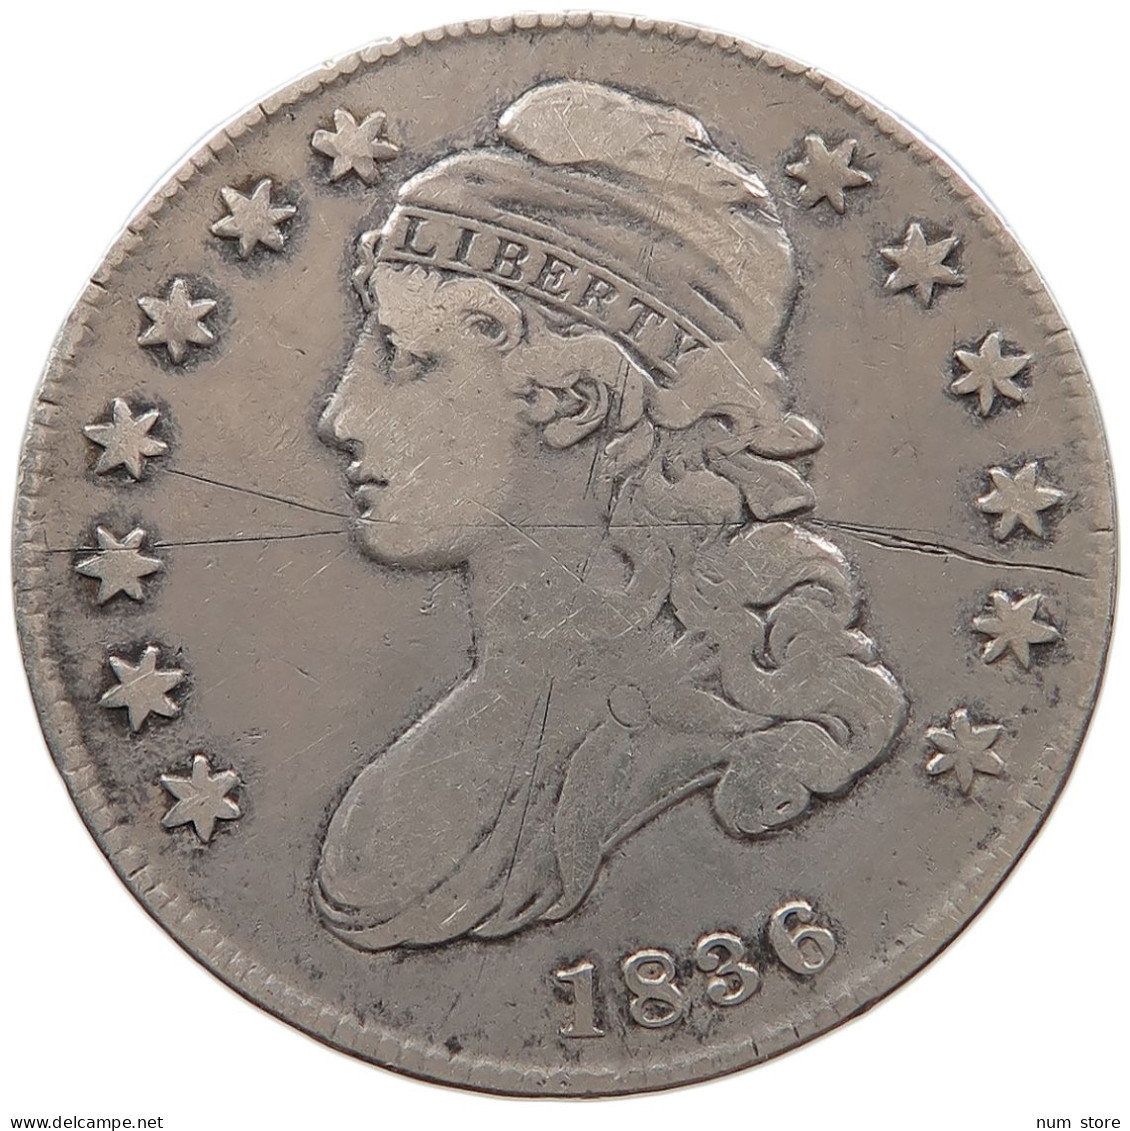 UNITED STATES OF AMERICA HALF DOLLAR 1836 CAPPED BUST #t141 0419 - 1794-1839: Early Halves (Prémices)